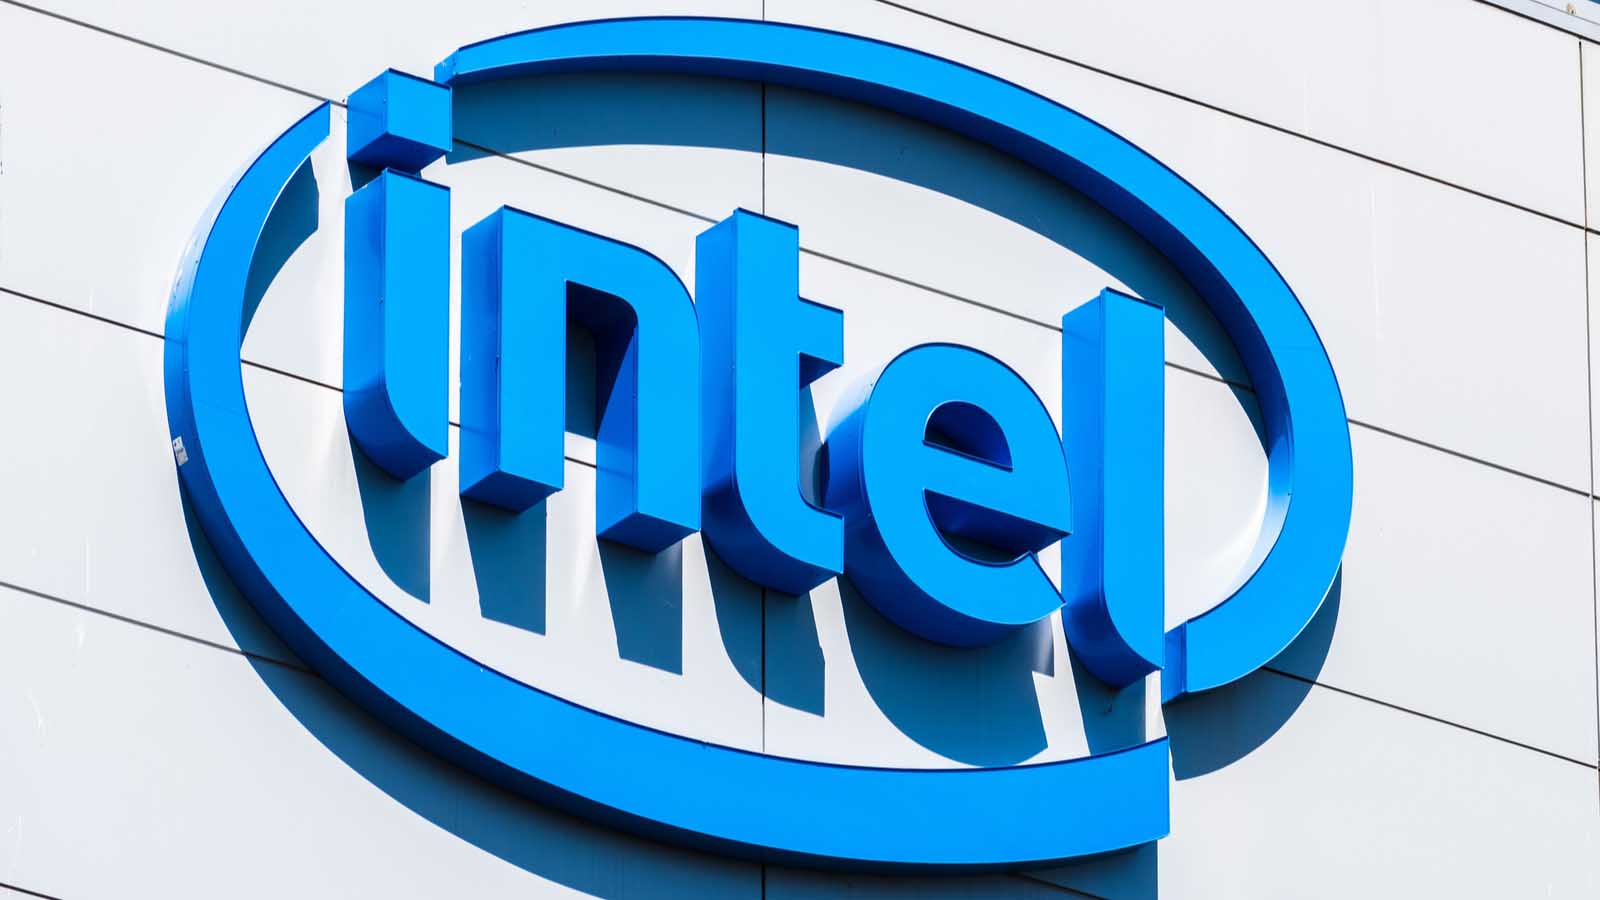 Intel Stock at $30: Bargain Buy or Overvalued Tech Giant?